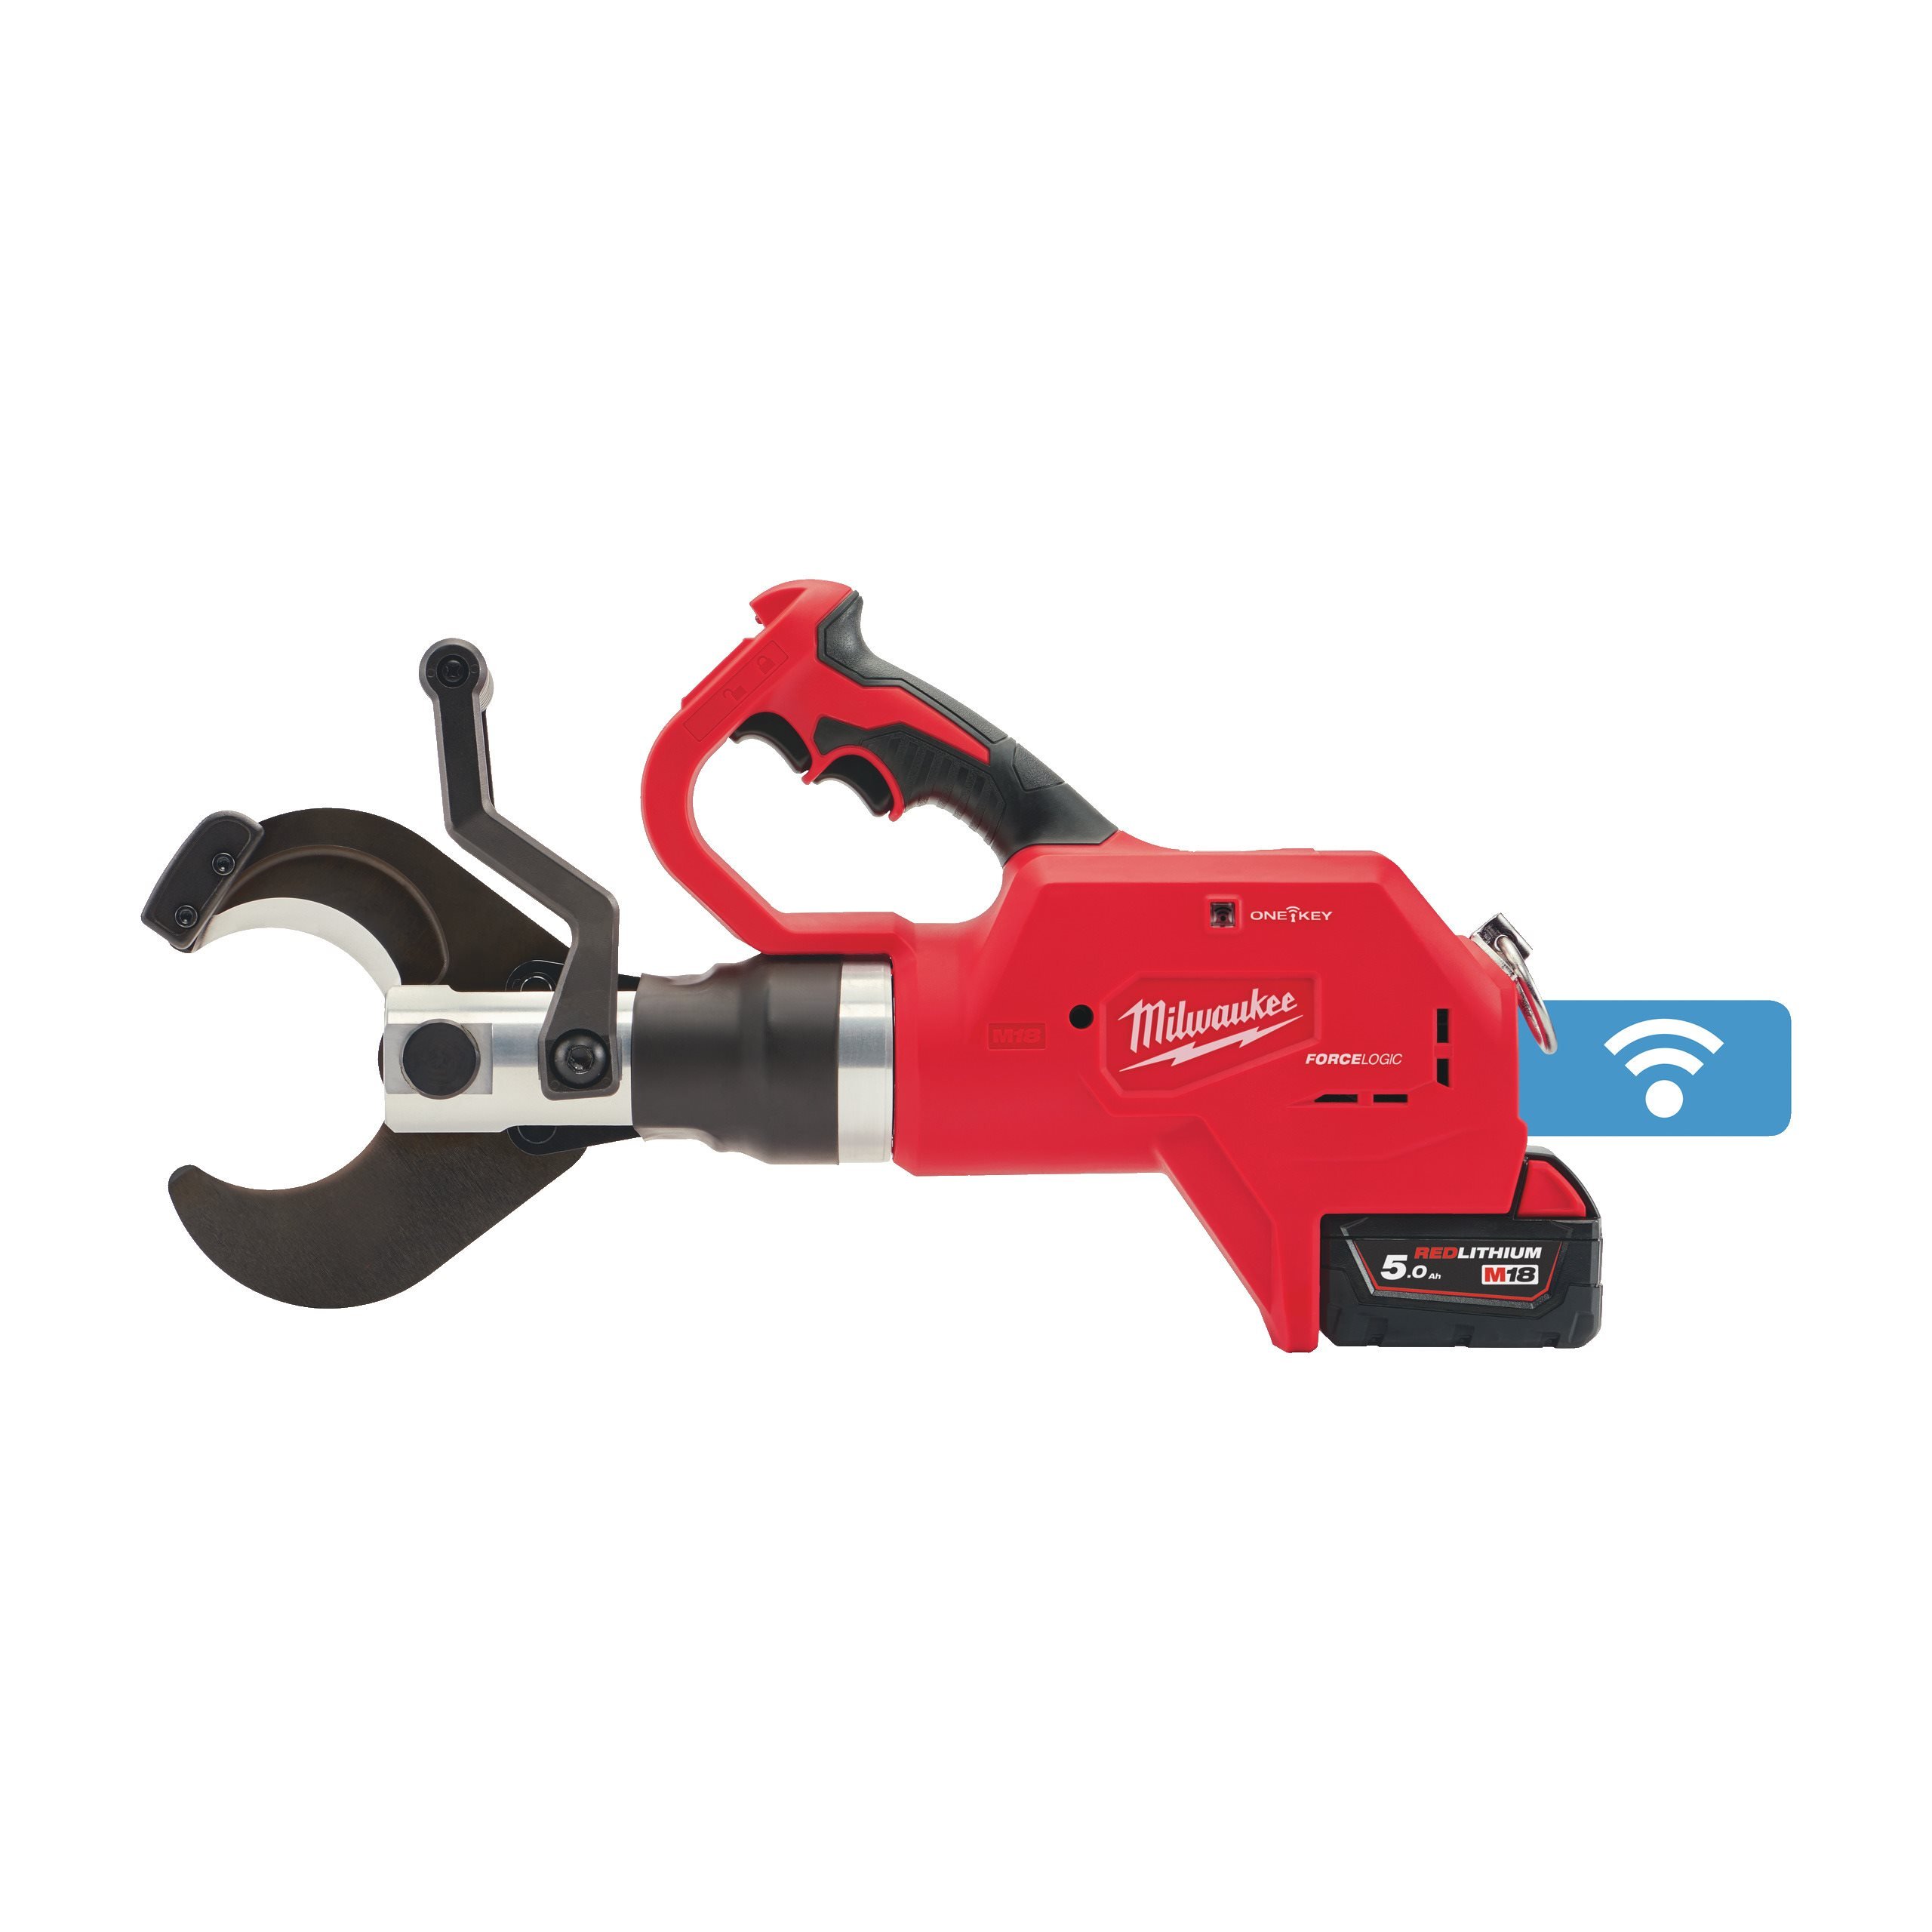 How to Use the Milwaukee M12 Electric Cable Cutter  Edit